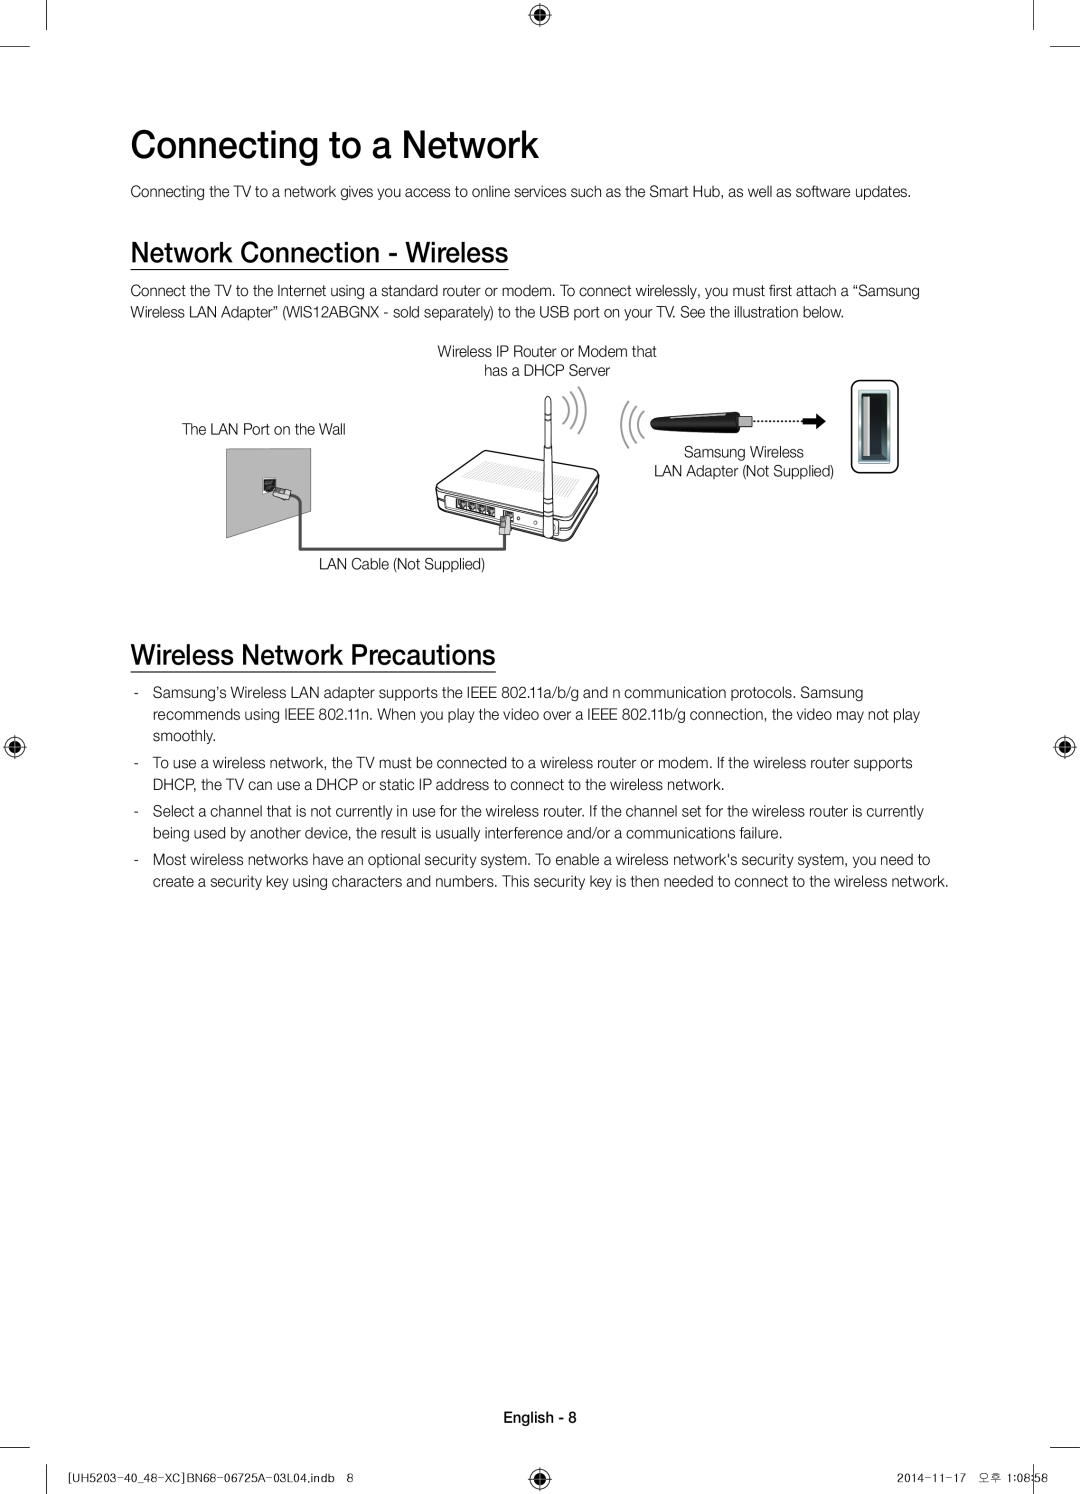 Samsung UE40H5203AWXXC manual Connecting to a Network, Network Connection - Wireless, Wireless Network Precautions 